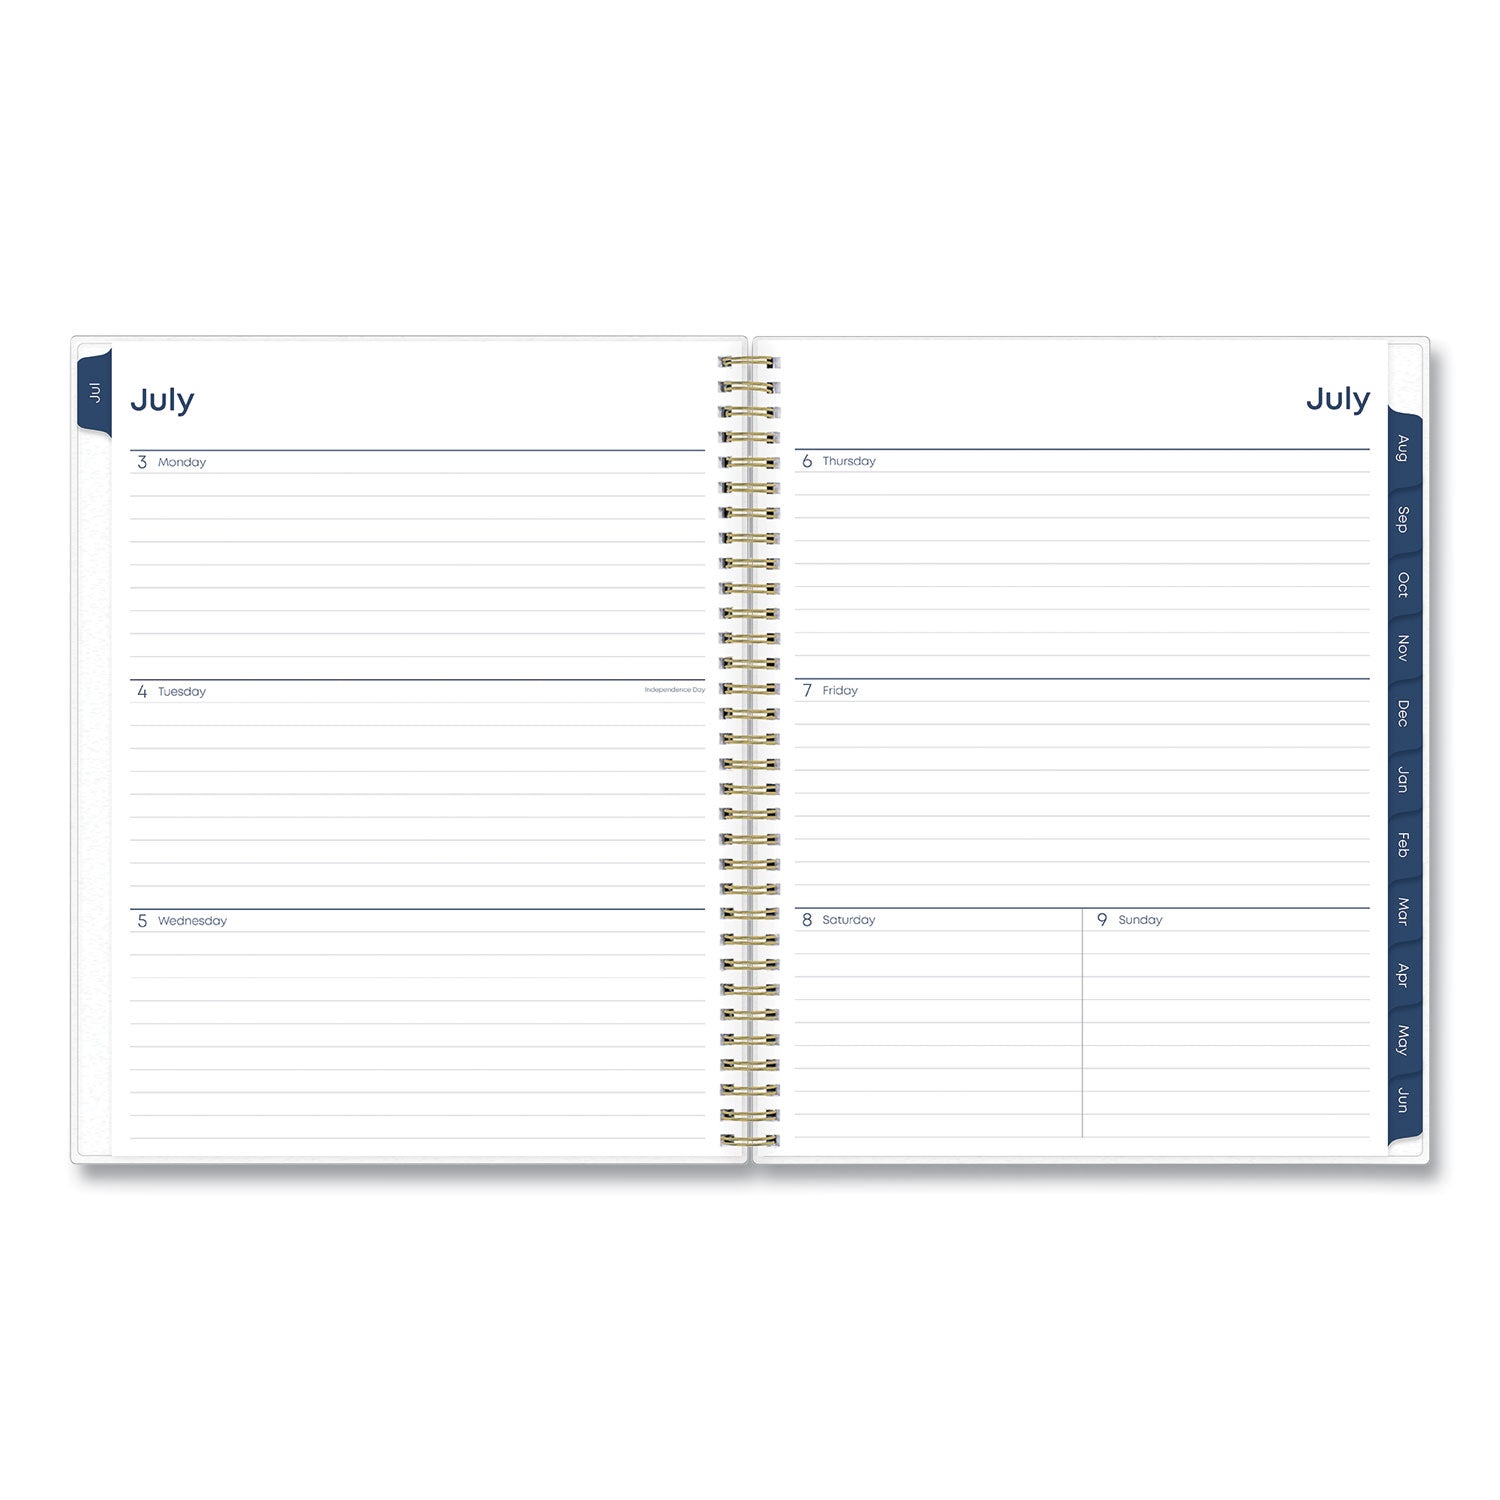 gemma-academic-year-weekly-monthly-planner-geode-artwork-11-x-85-blue-purple-cover-12-month-july-june-2023-2024_bls118177 - 3